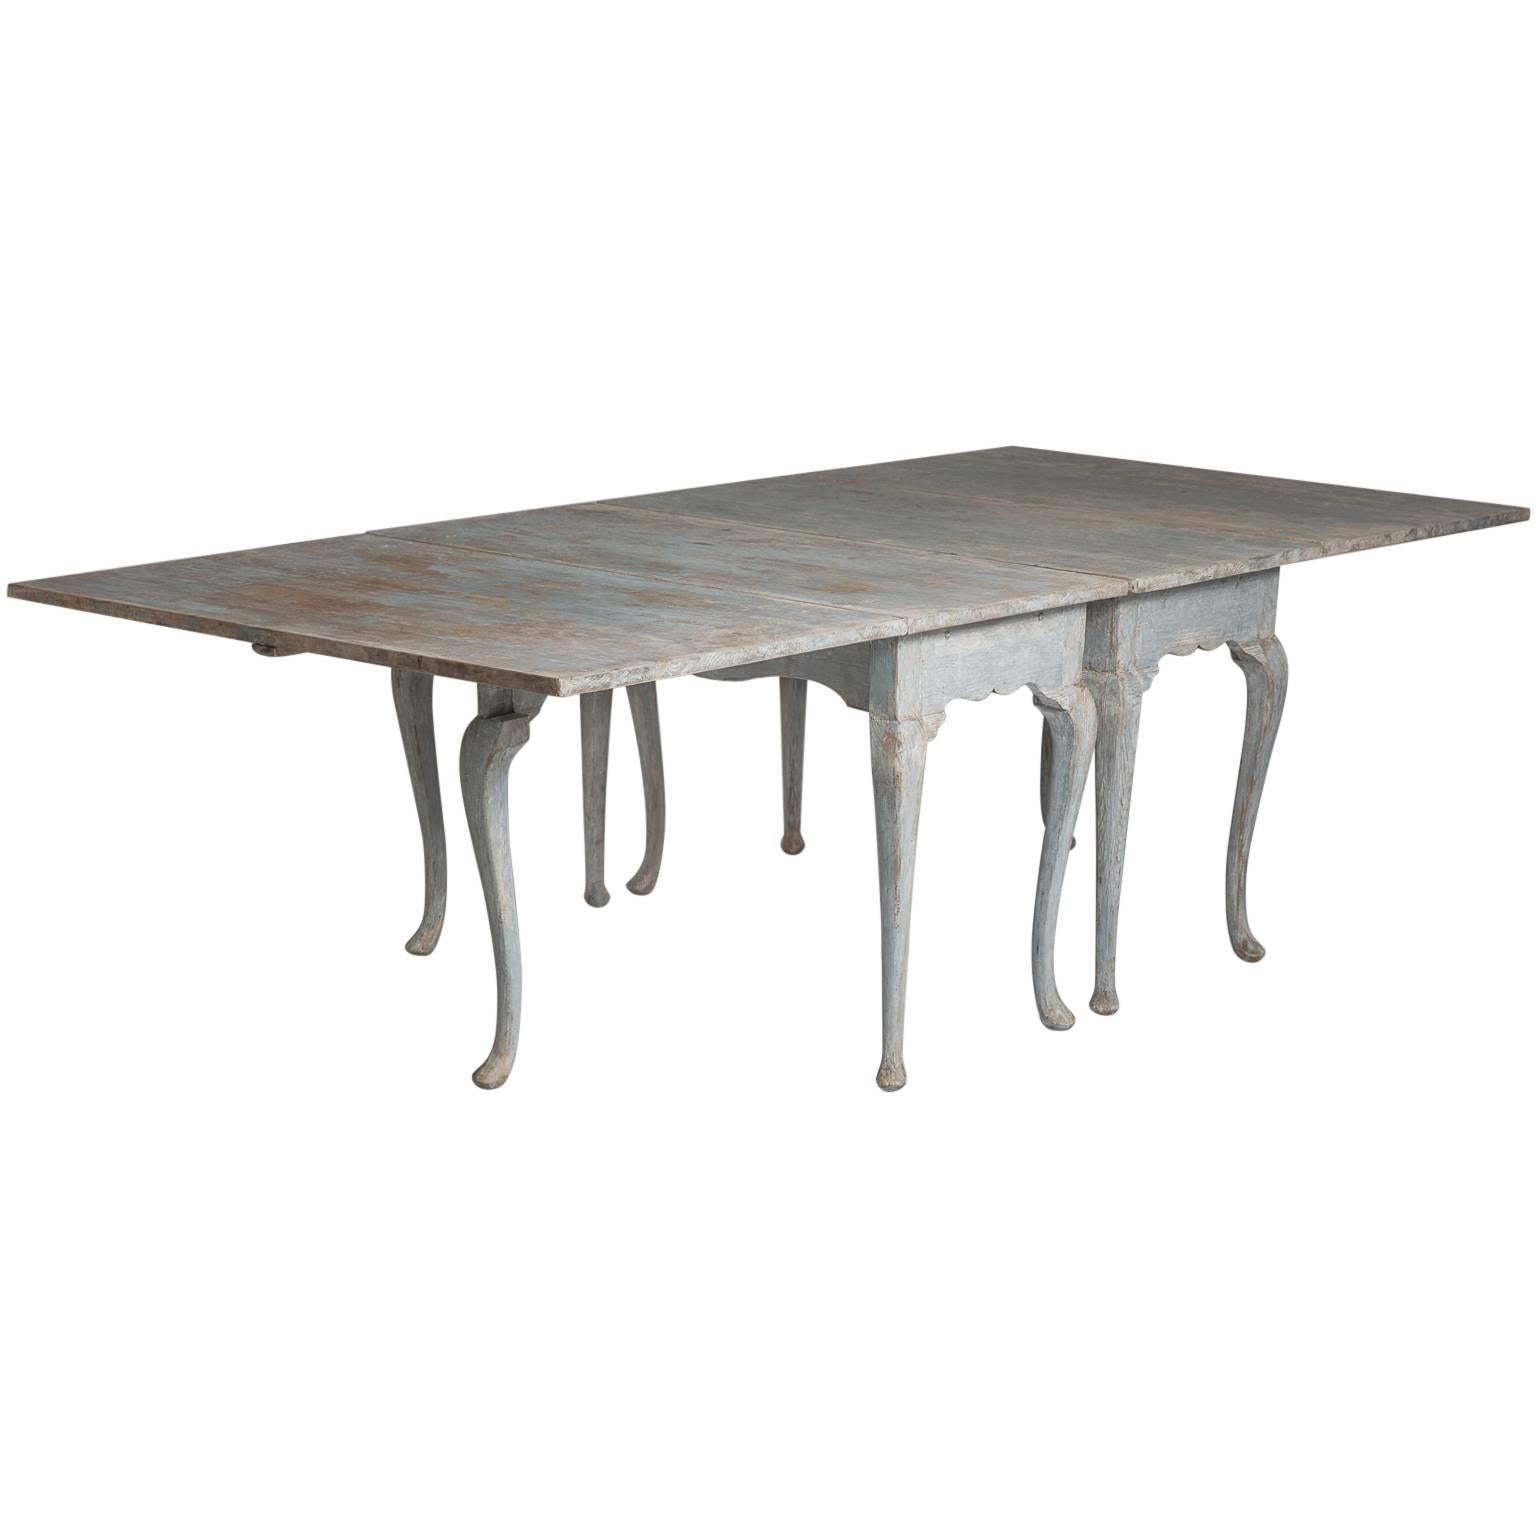 These versatile tables can be used as consoles standing against a wall or as single dining tables seating six. They truly shine as one long dining table those measures 98” long by 47” wide, seating 10-12 comfortably. The grey paint is